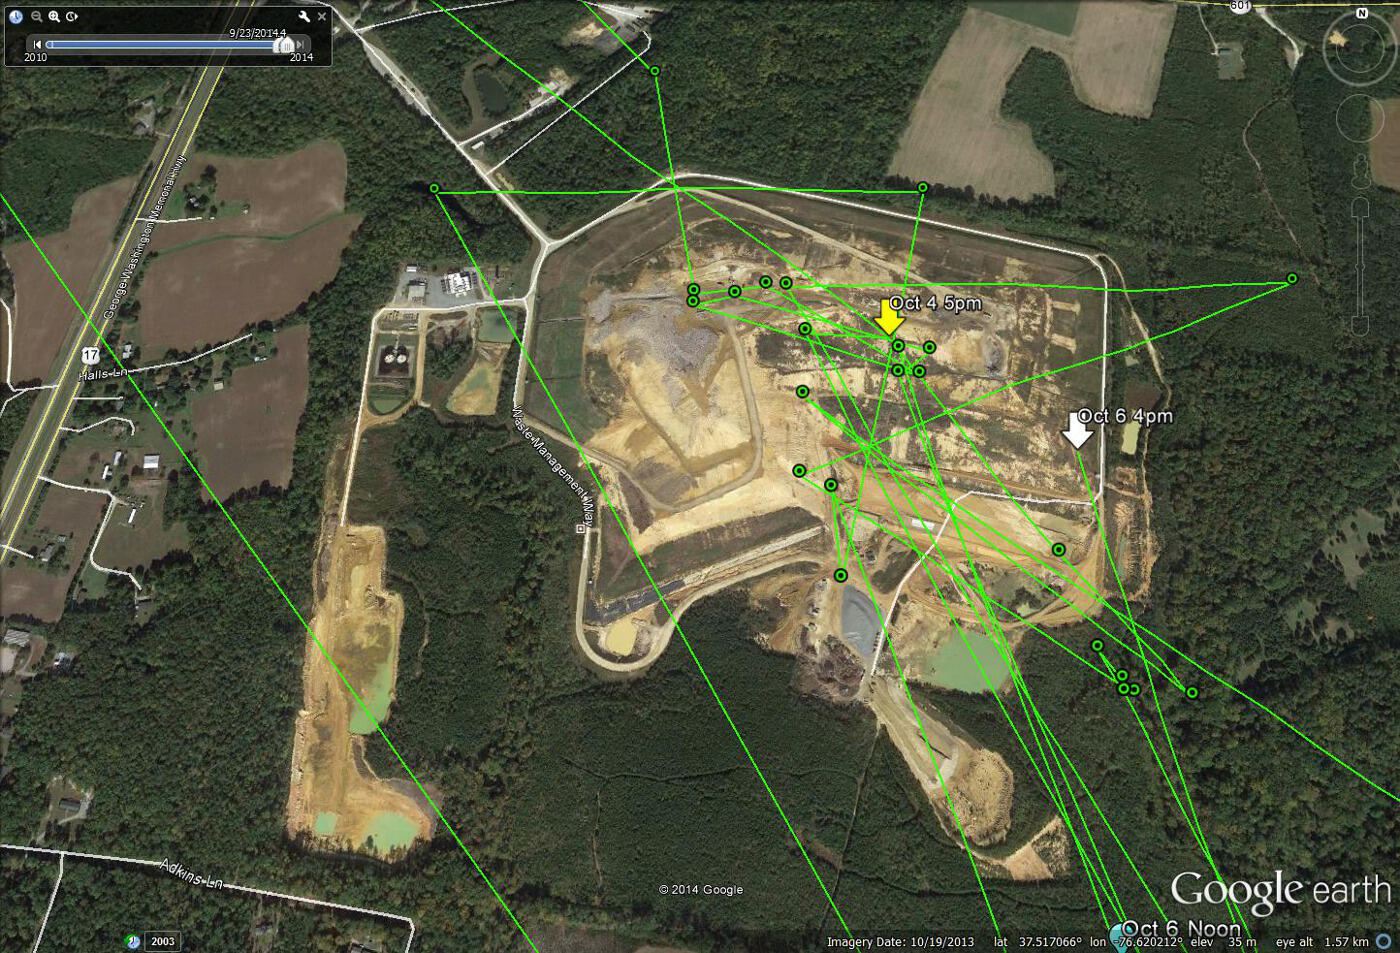 The flight pattern of a young eagle name Camelia. The green zigs and zags show her activity around a Gloucester County landfill.